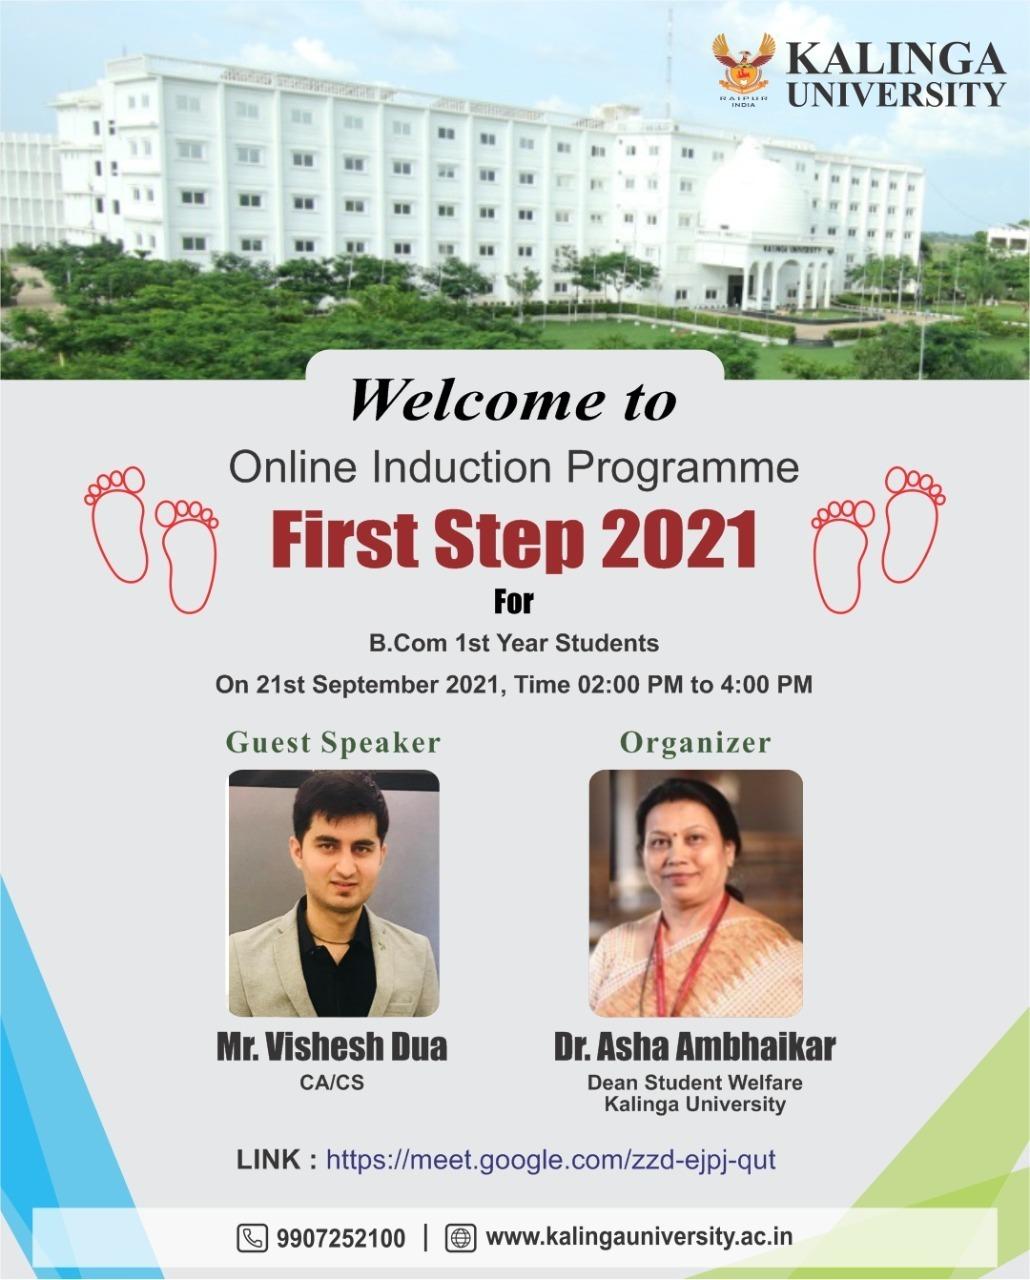 Kalinga University organizes Online Induction program for the Newly Admitted Students for B.Com Program ‘First- Step 2021’